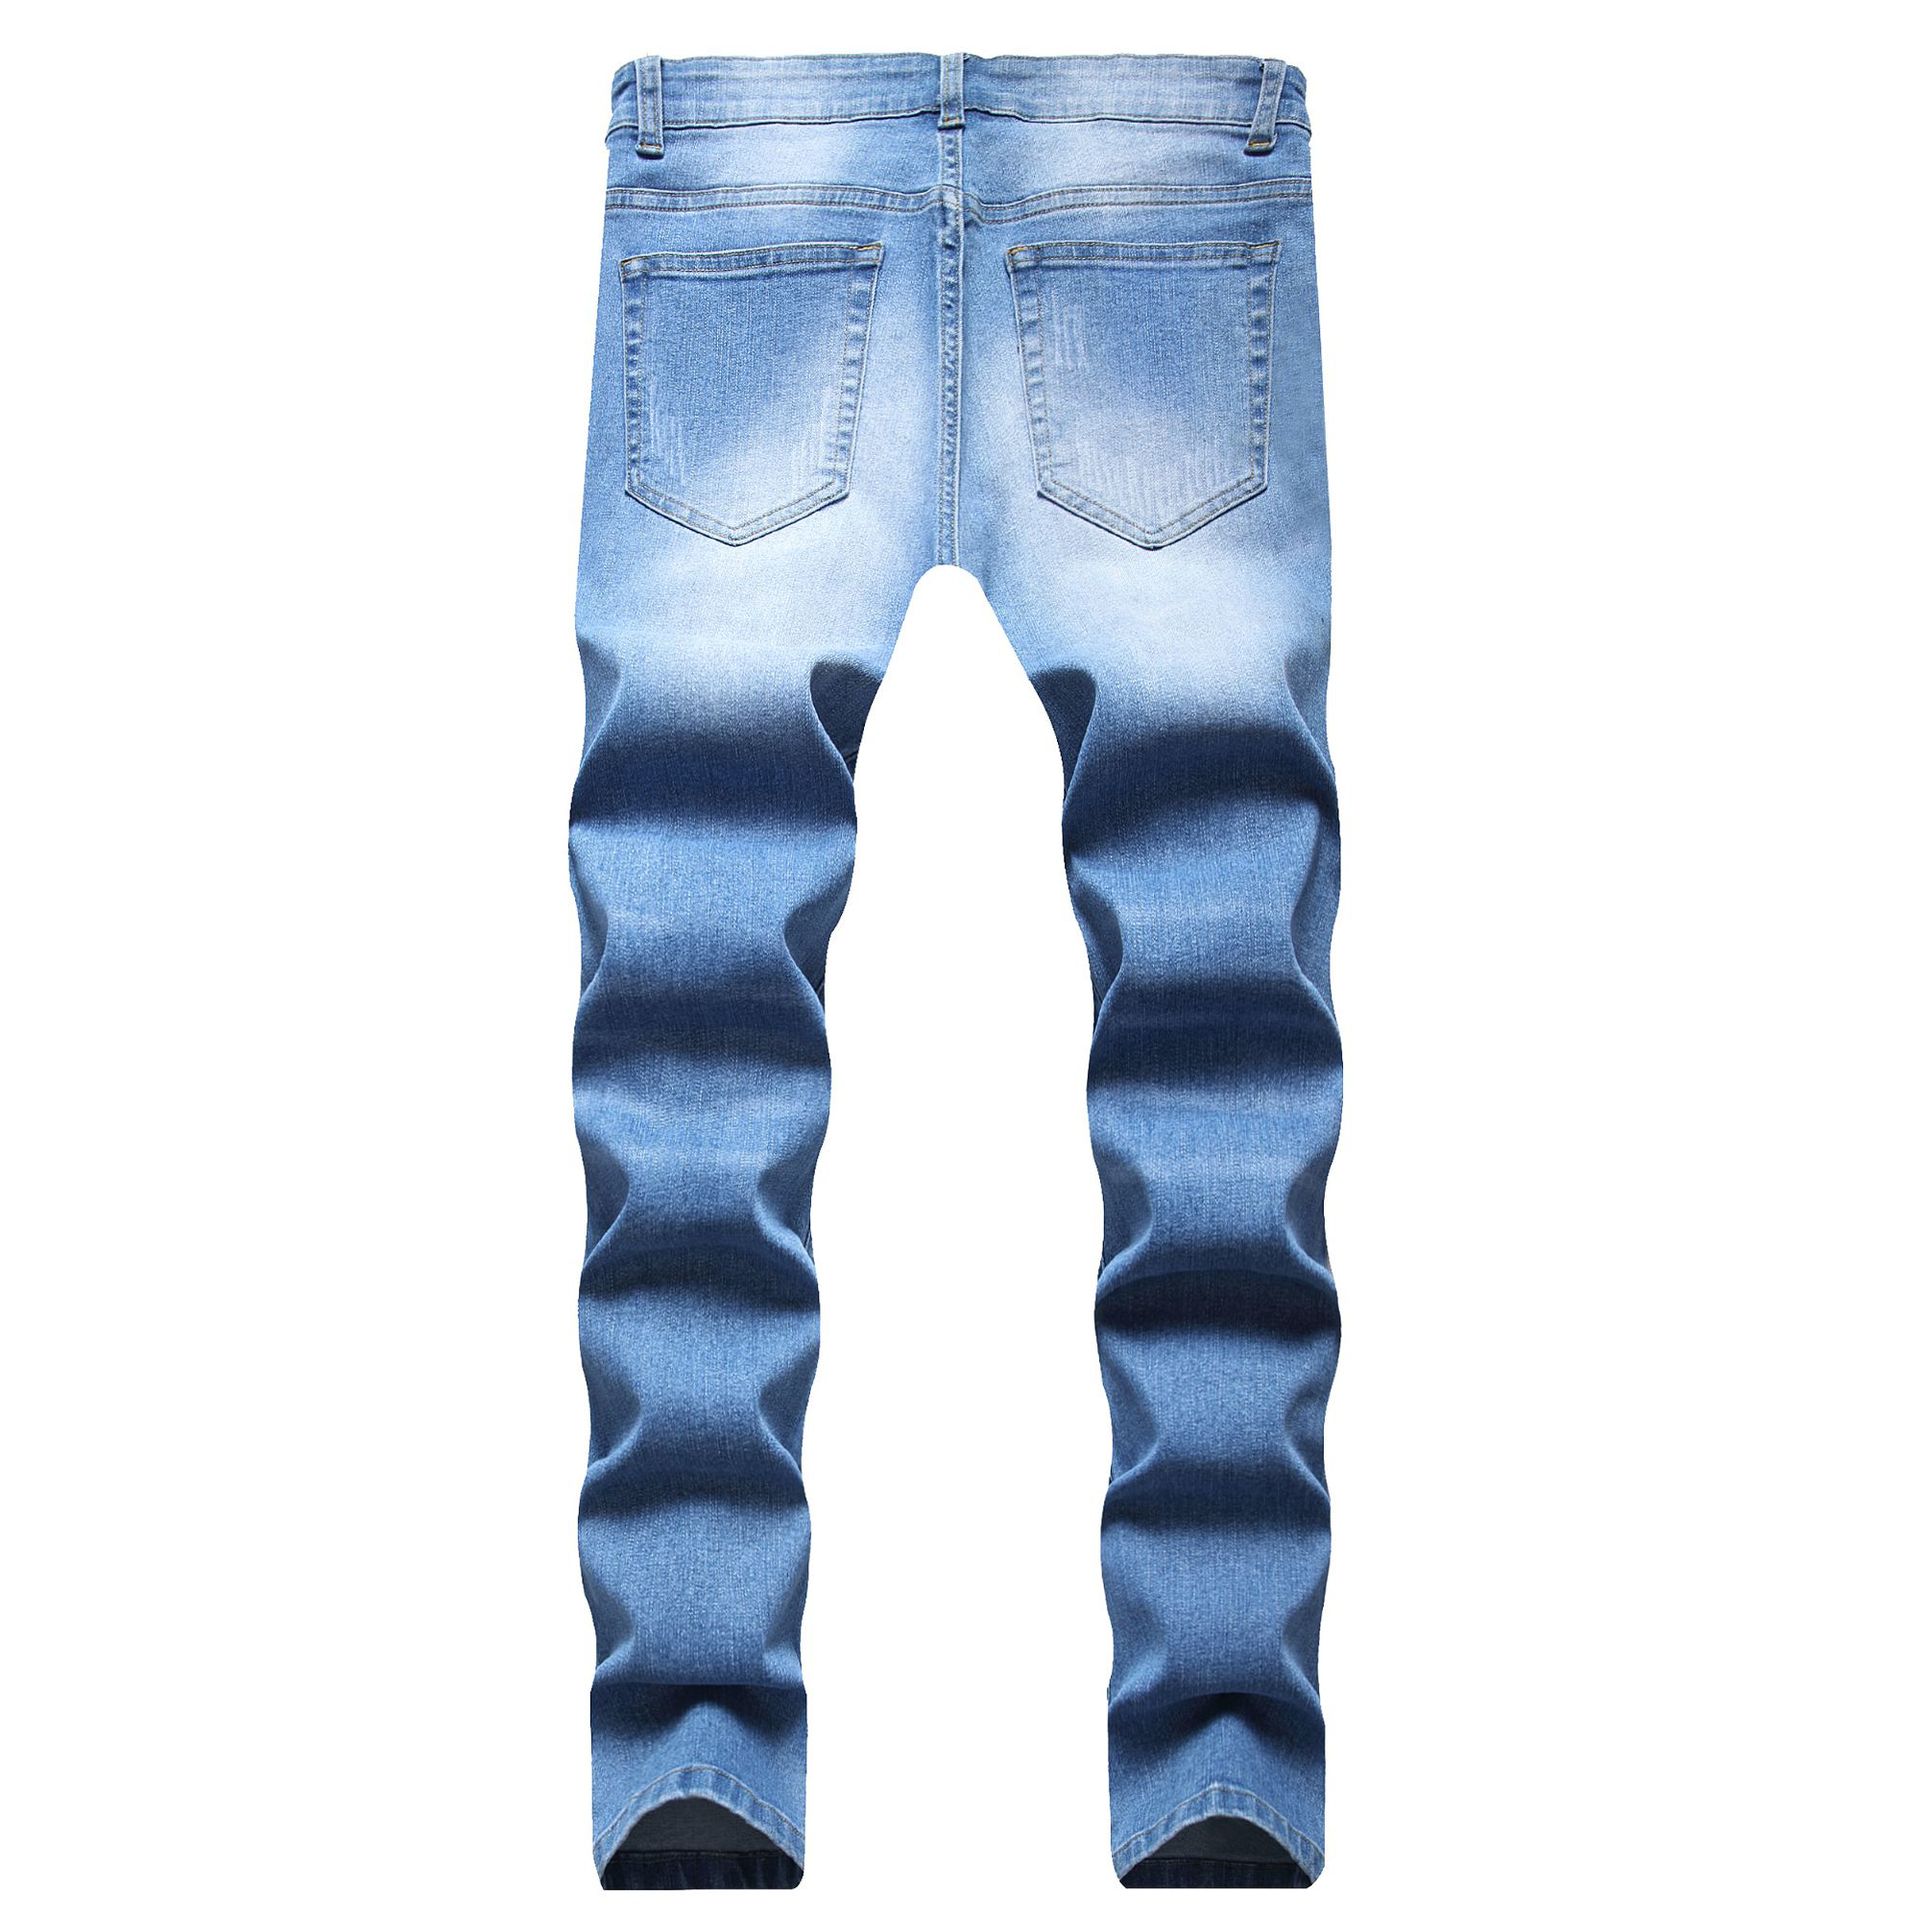 9c3df9d8 a3c4 426f be4a dc8ffa9af24d - European And American Men Old Tight-Fitting Casual Denim Trousers